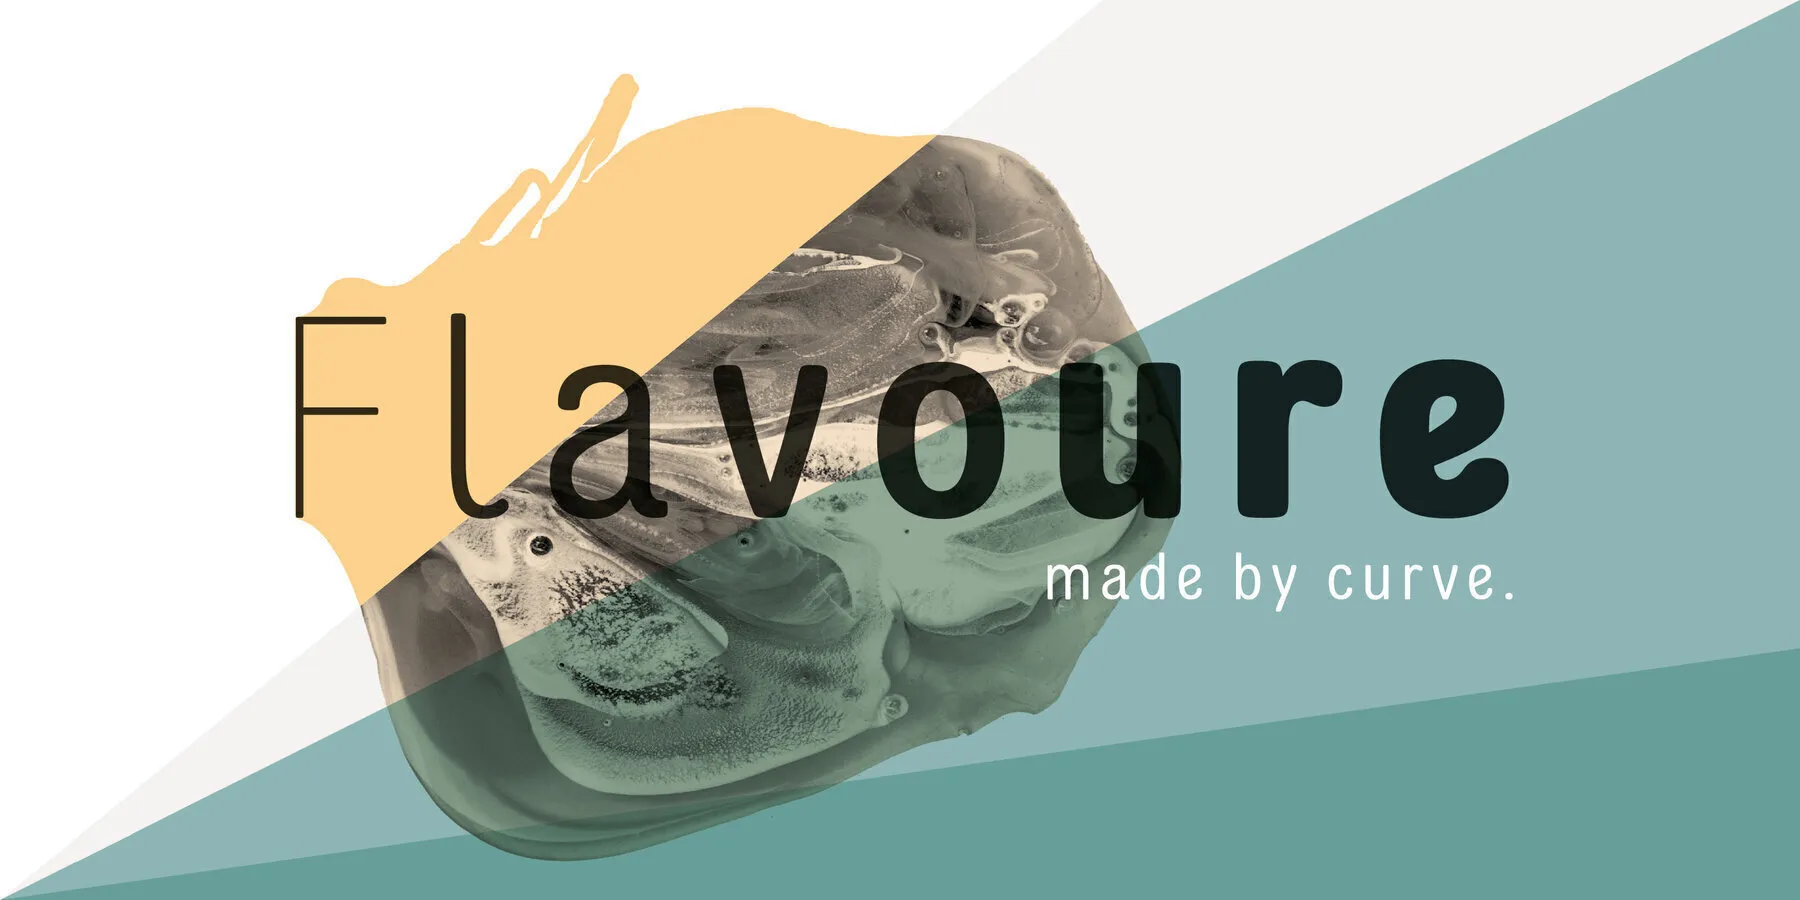 Flavoure